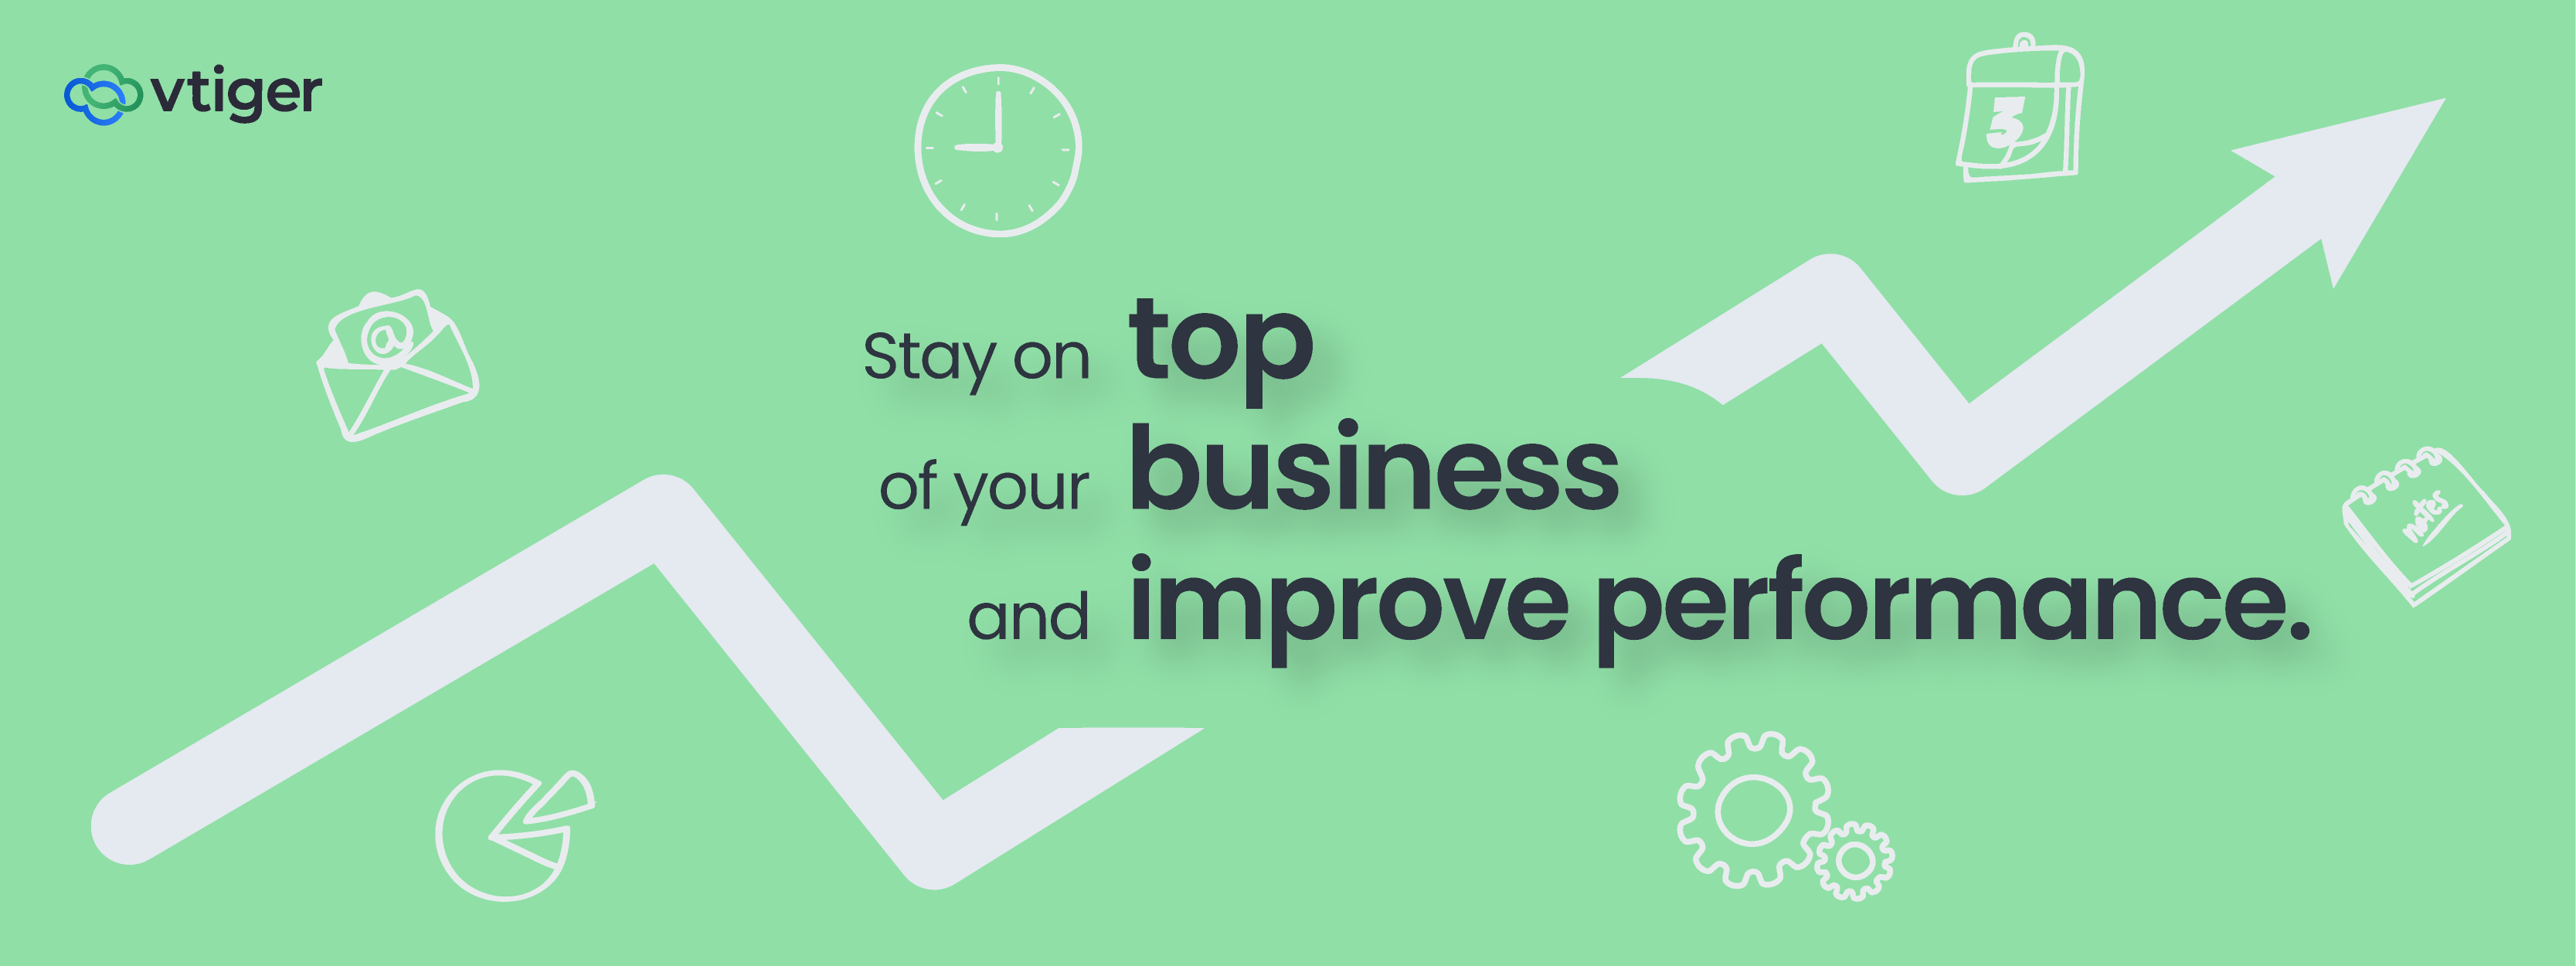 Productivity for Small Businesses Banner